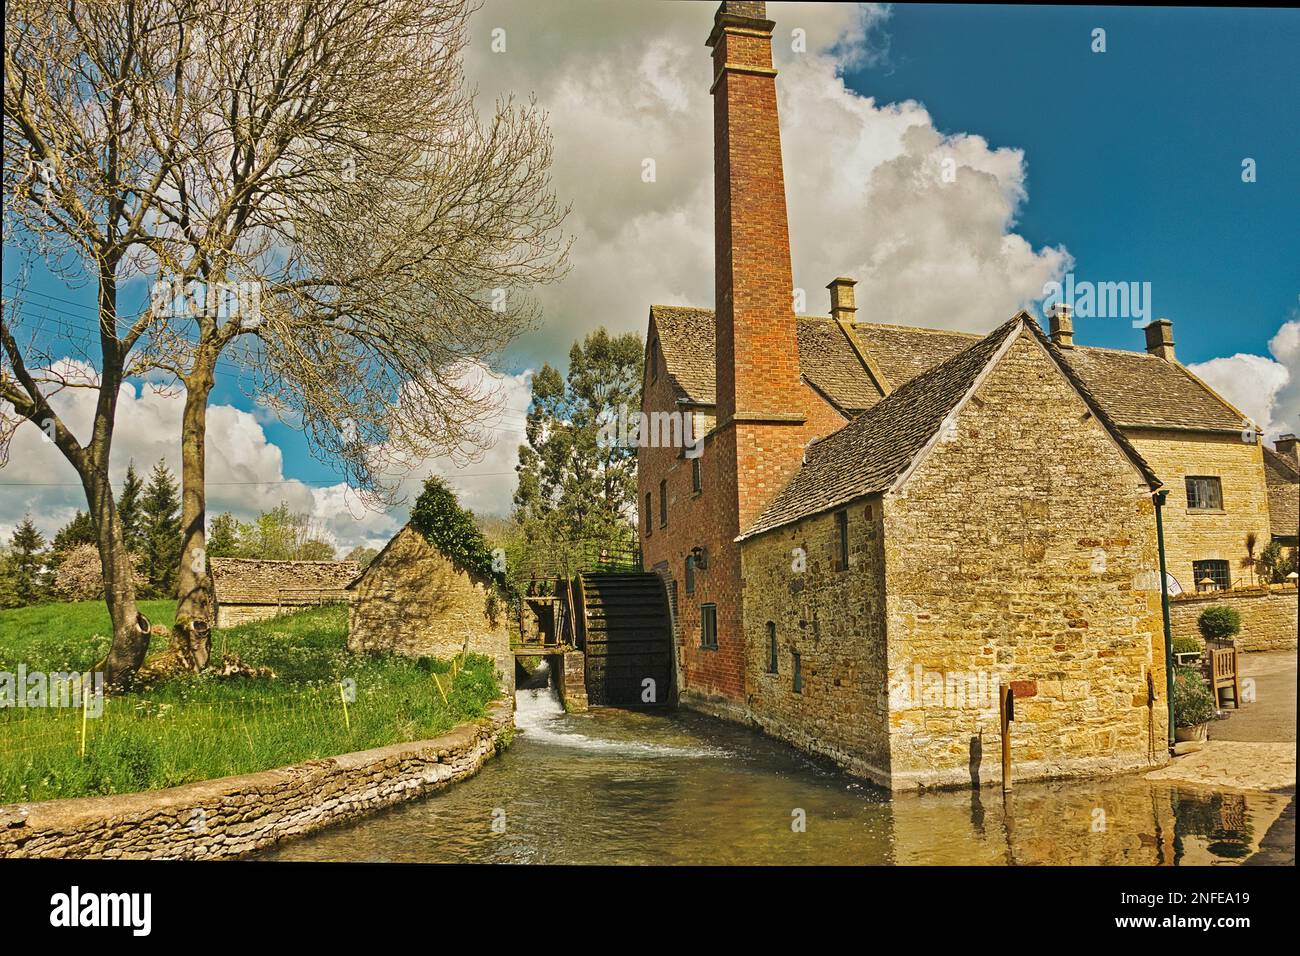 The Old Mill, Lower Slaughter, Gloucestershire, Royaume-Uni Banque D'Images